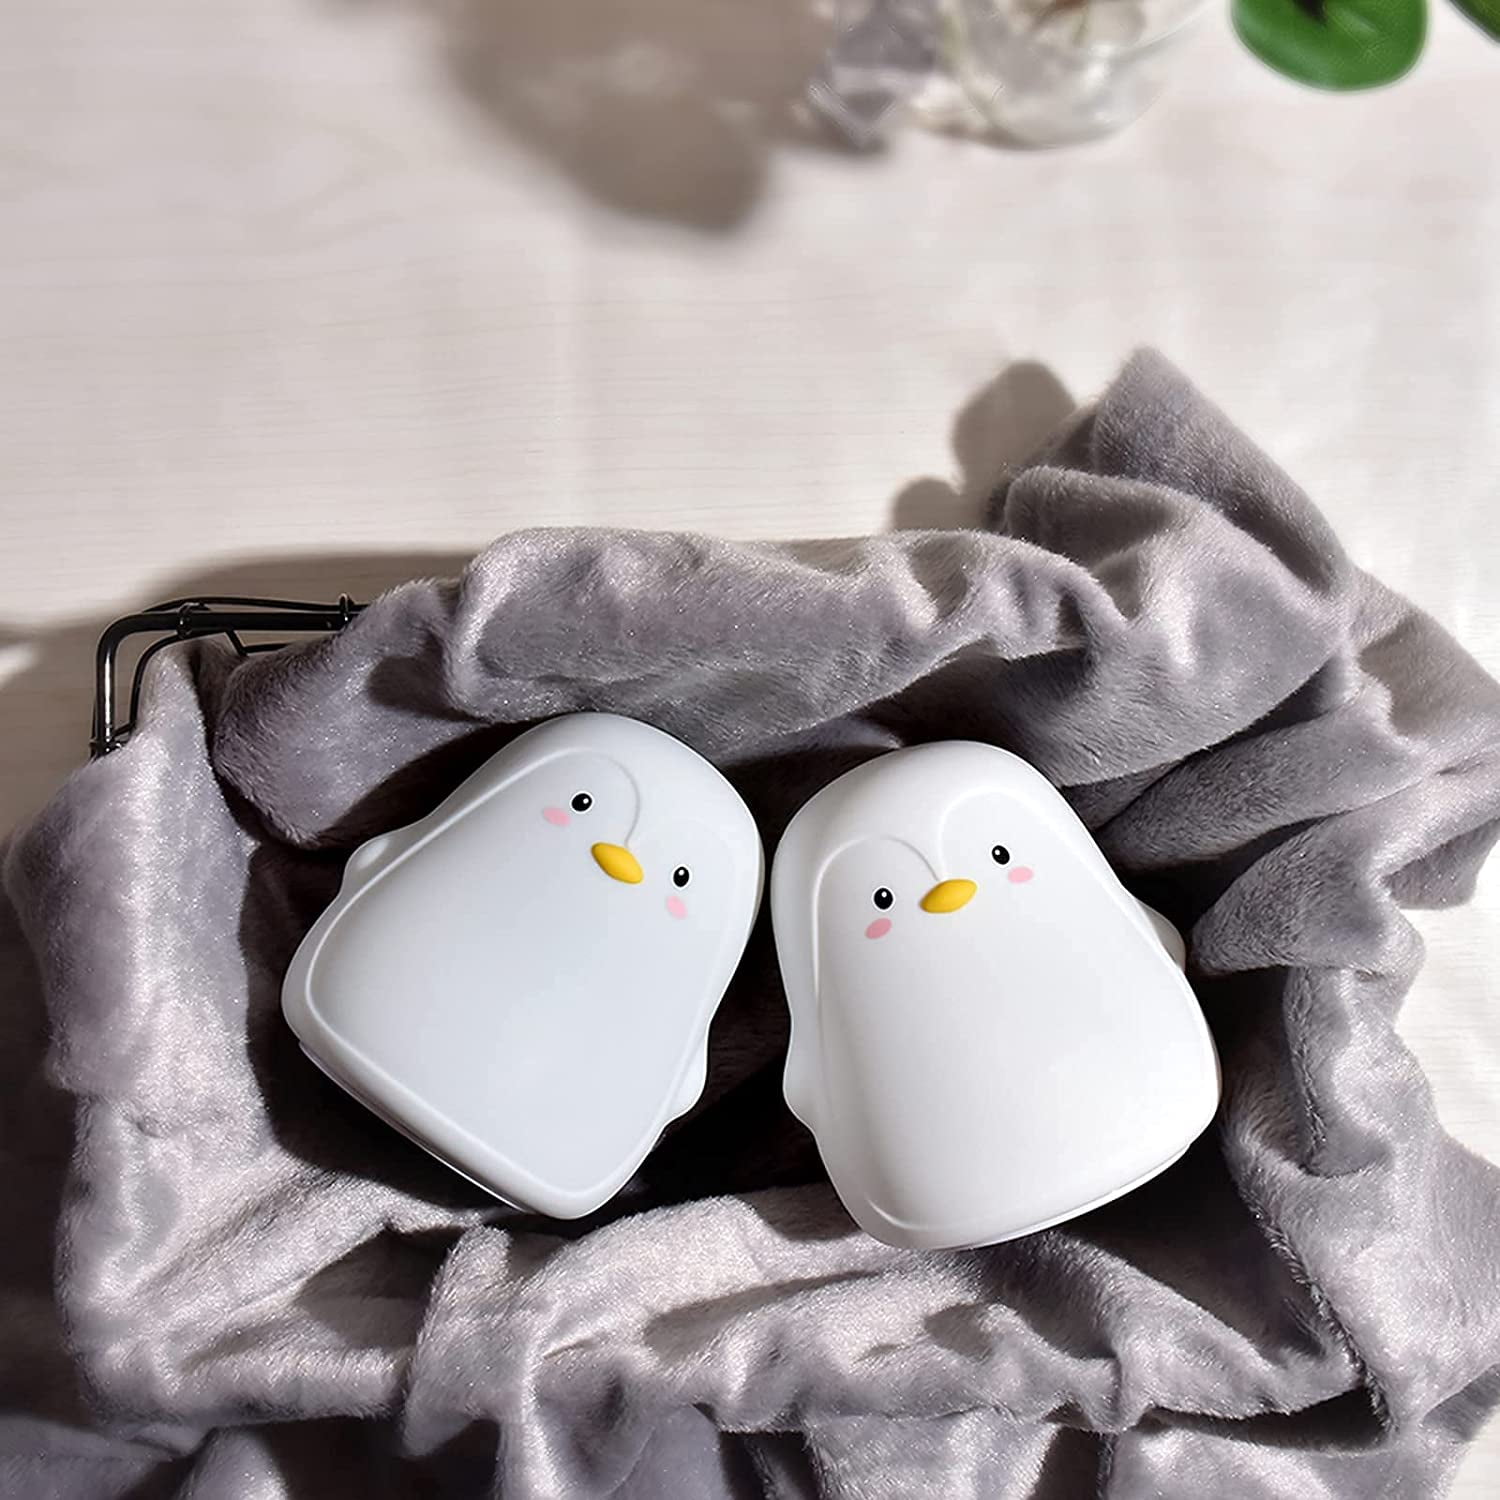 Penguin LED Night for Light Girls Tap Rechargeable USB Squishy with Nursery Boys Changing Portable Soft Toddler - Baby Bedroom Gifts Kids, Control, for Light Color Cute Night Children Kids Lamp Silicone